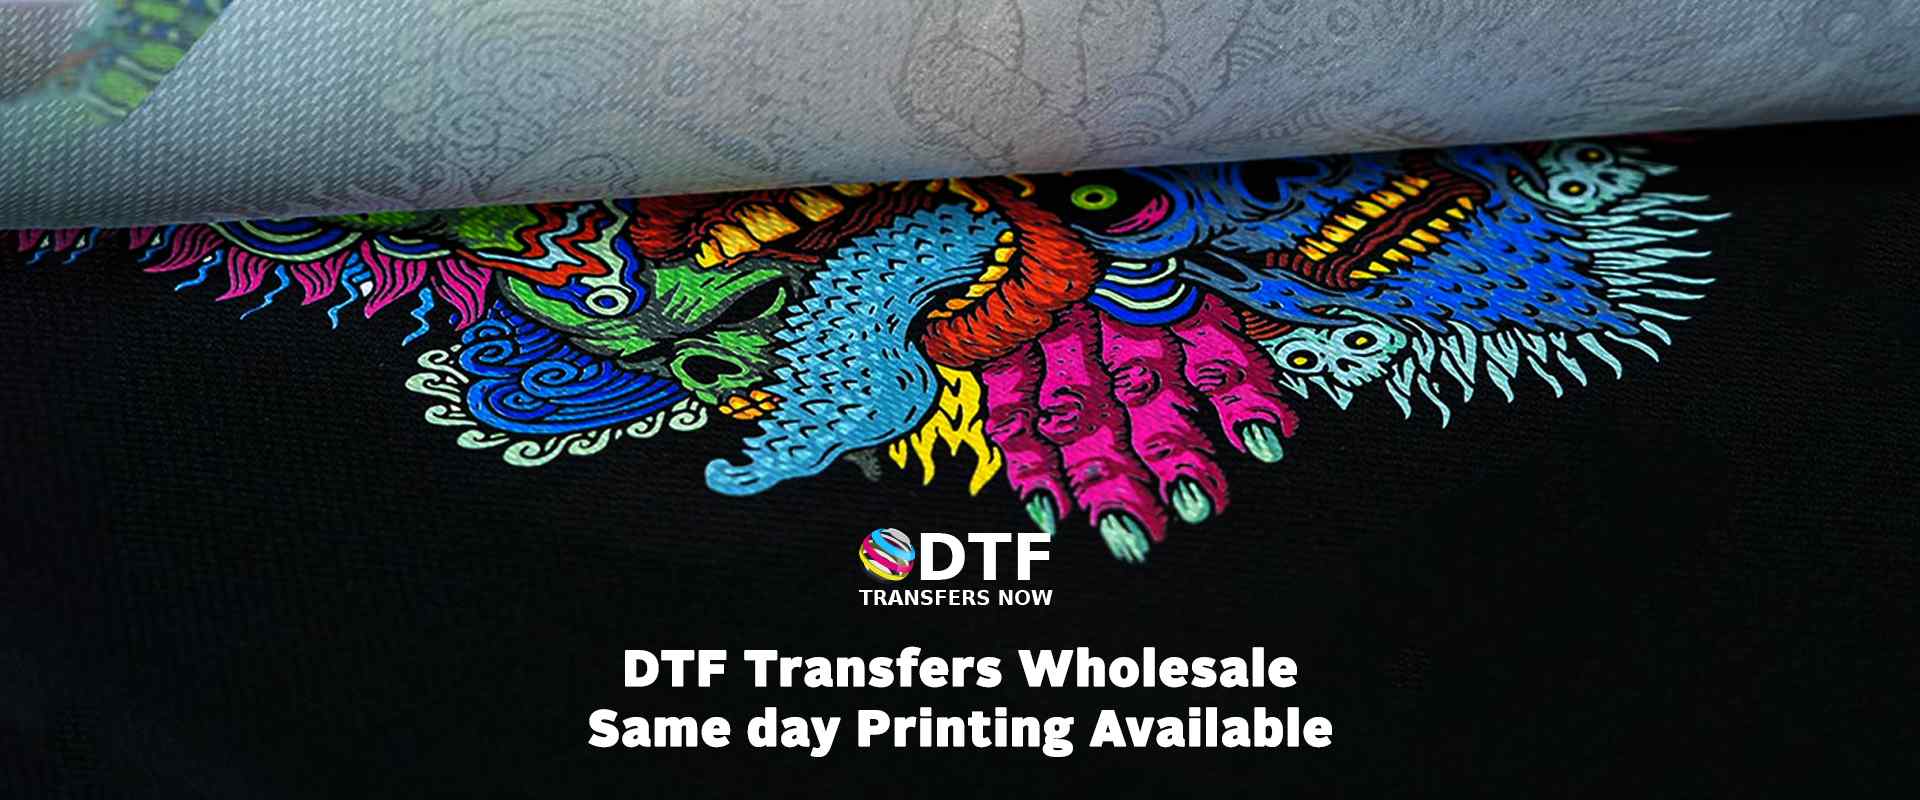 Best DTF Printer for Printing T-Shirts | Custom DTF Transfers Wholesale - DTF Transfers Now